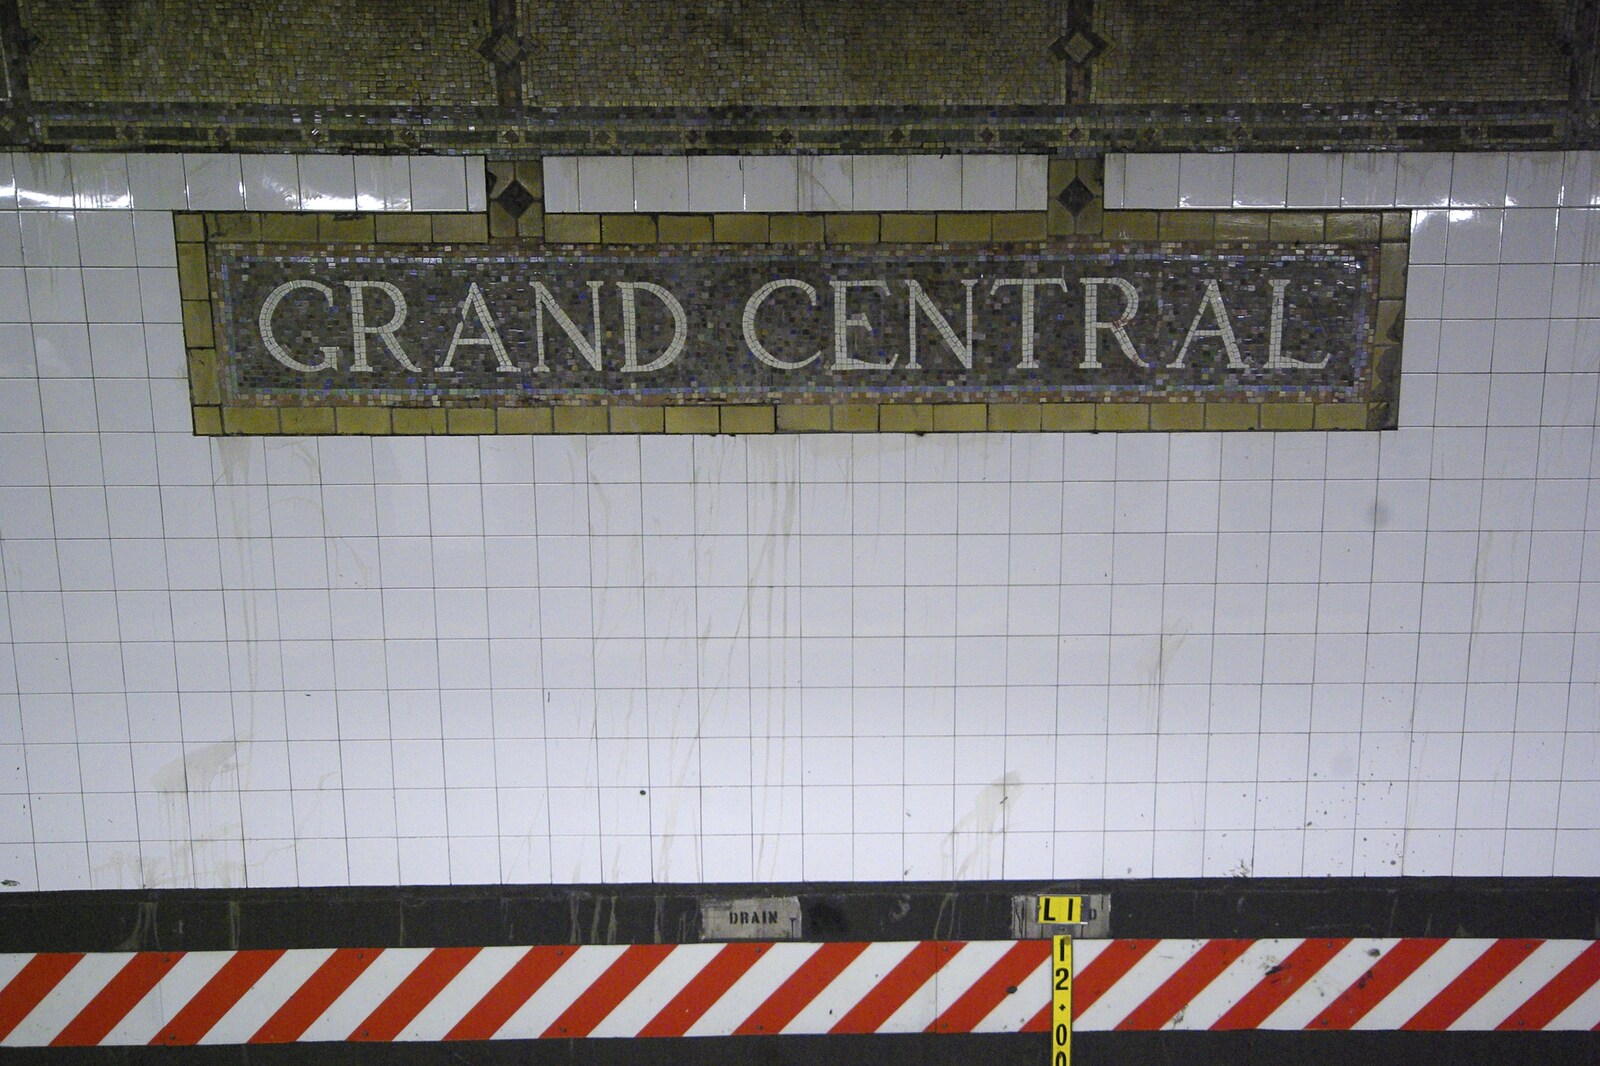 Persian Day Parade, Upper East Side and Midtown, New York, US - 25th March 2007: Grand Central sign